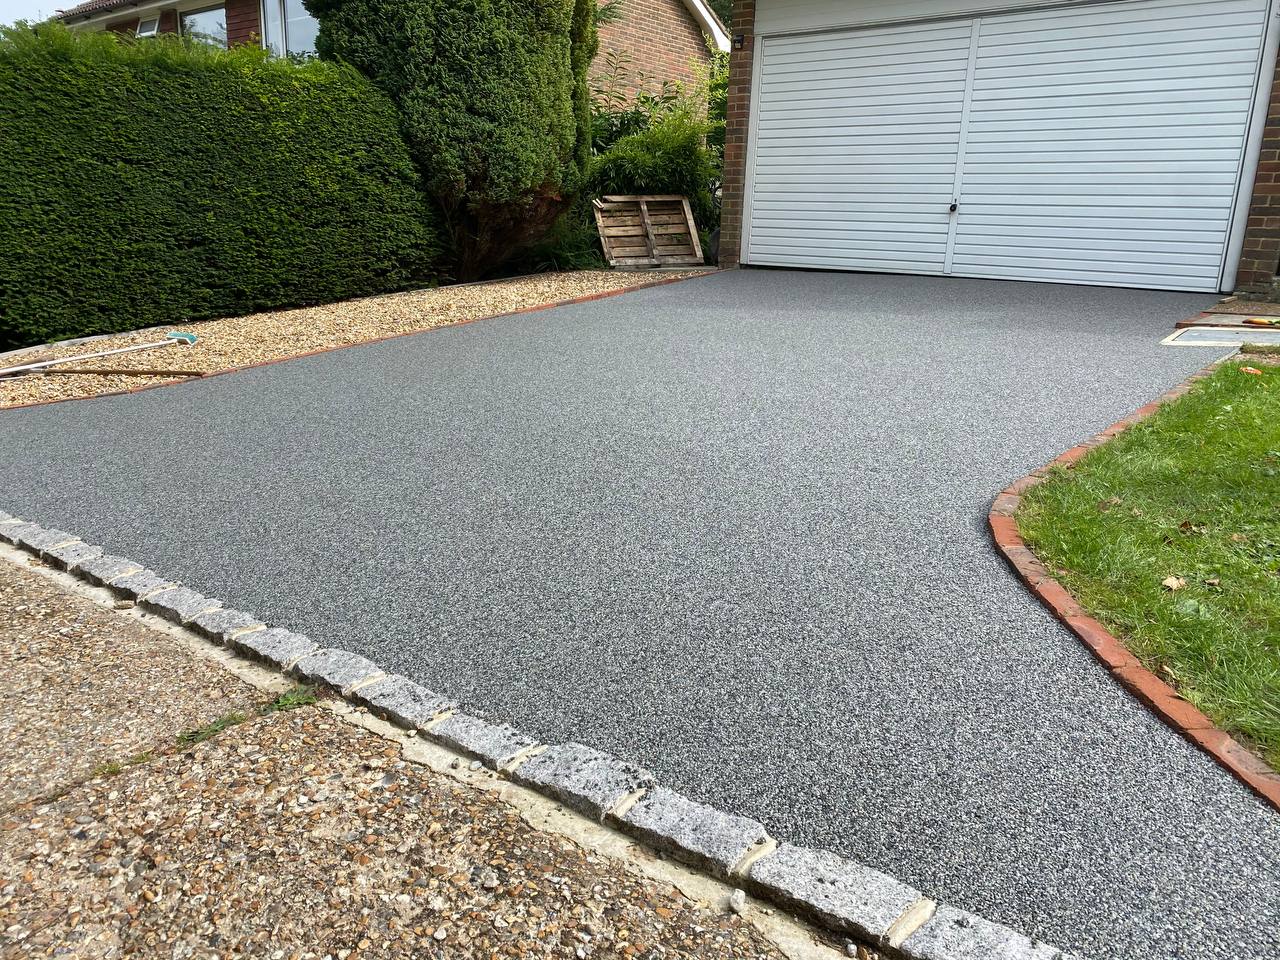 This is a photo of a new resin bound driveway carried out in Preston. All works done by Preston Resin Driveways